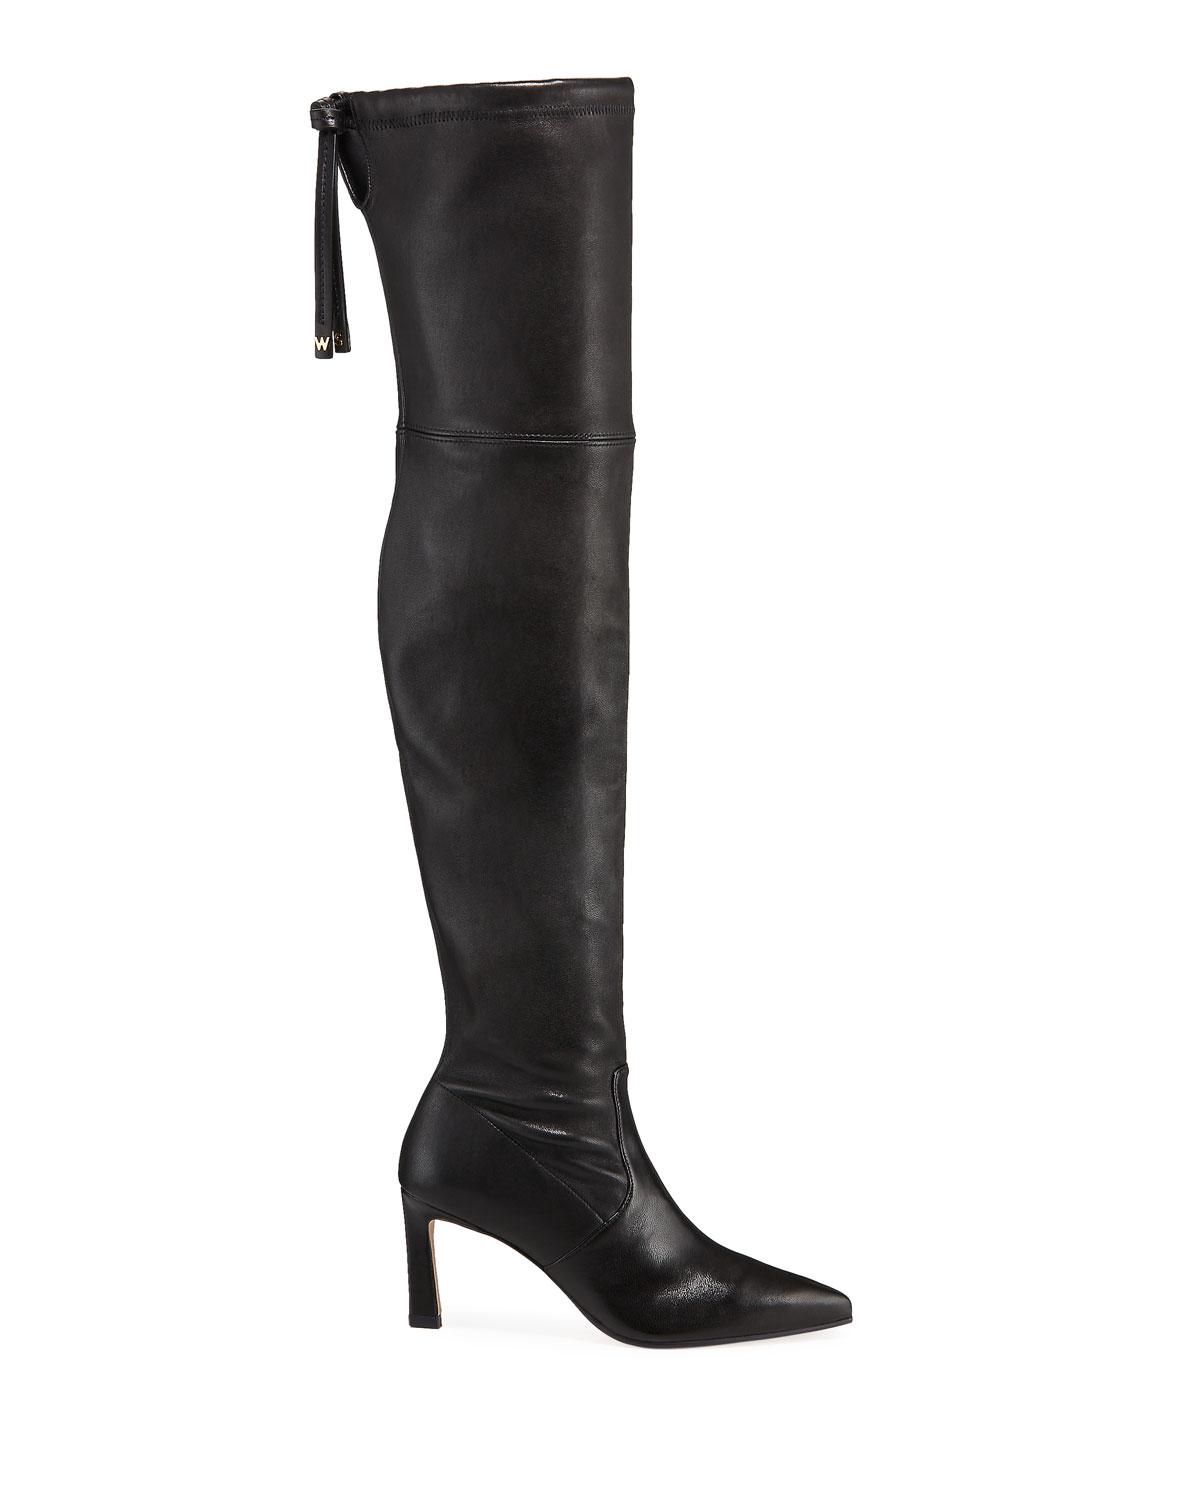 Stuart Weitzman Natalia 75mm Leather Over-the-knee Boots in Black - Lyst